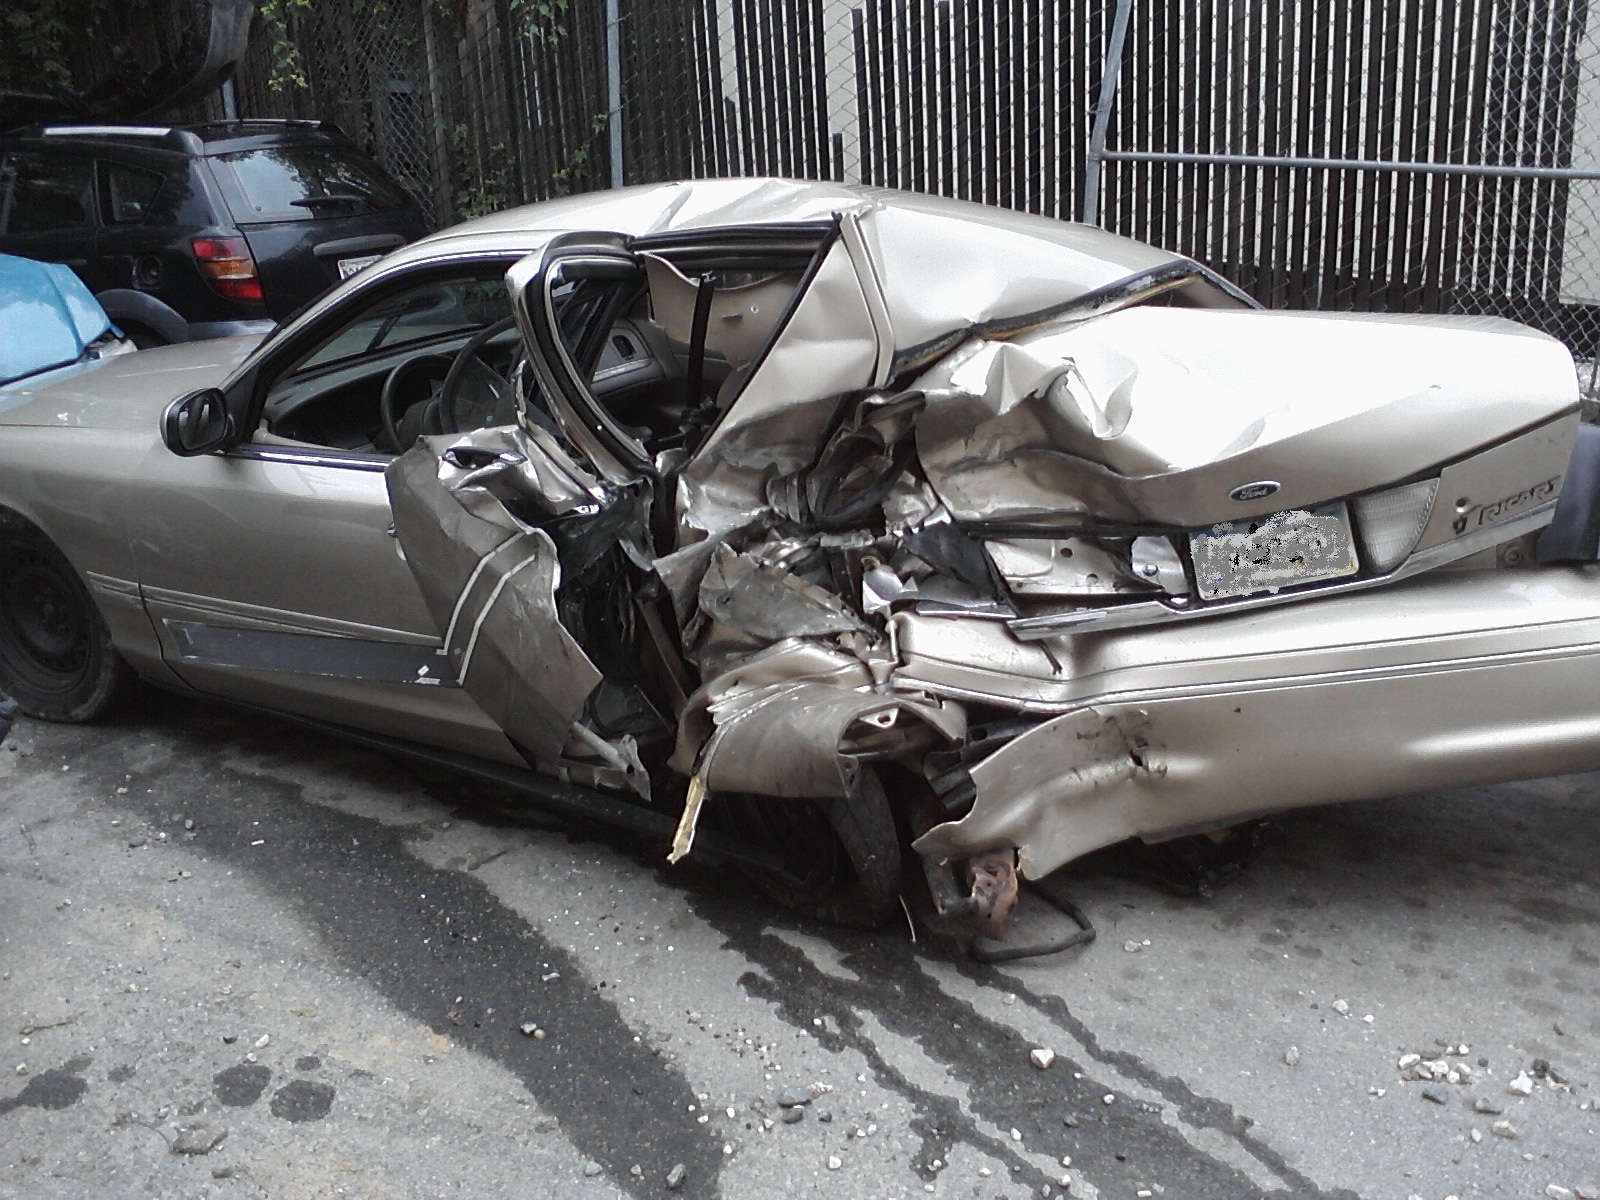 Can You Handle Your Own Car Accident Claim in Maryland?